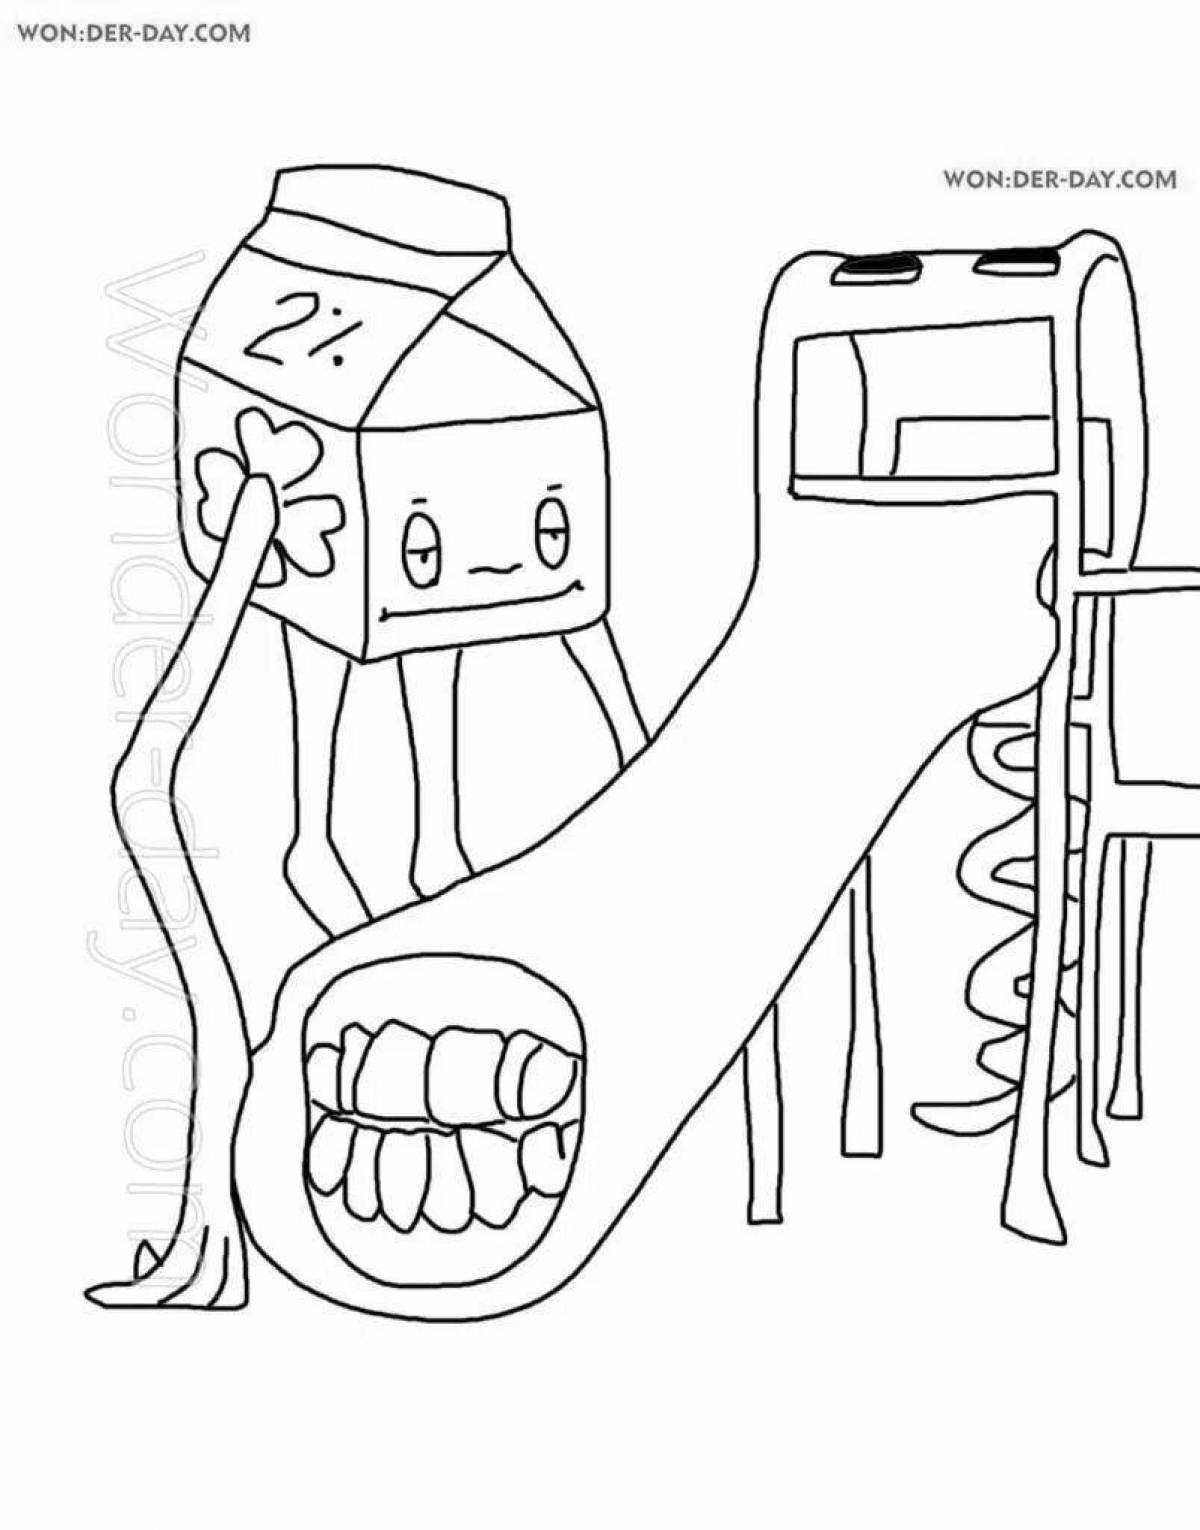 Henderson's funny monsters coloring page